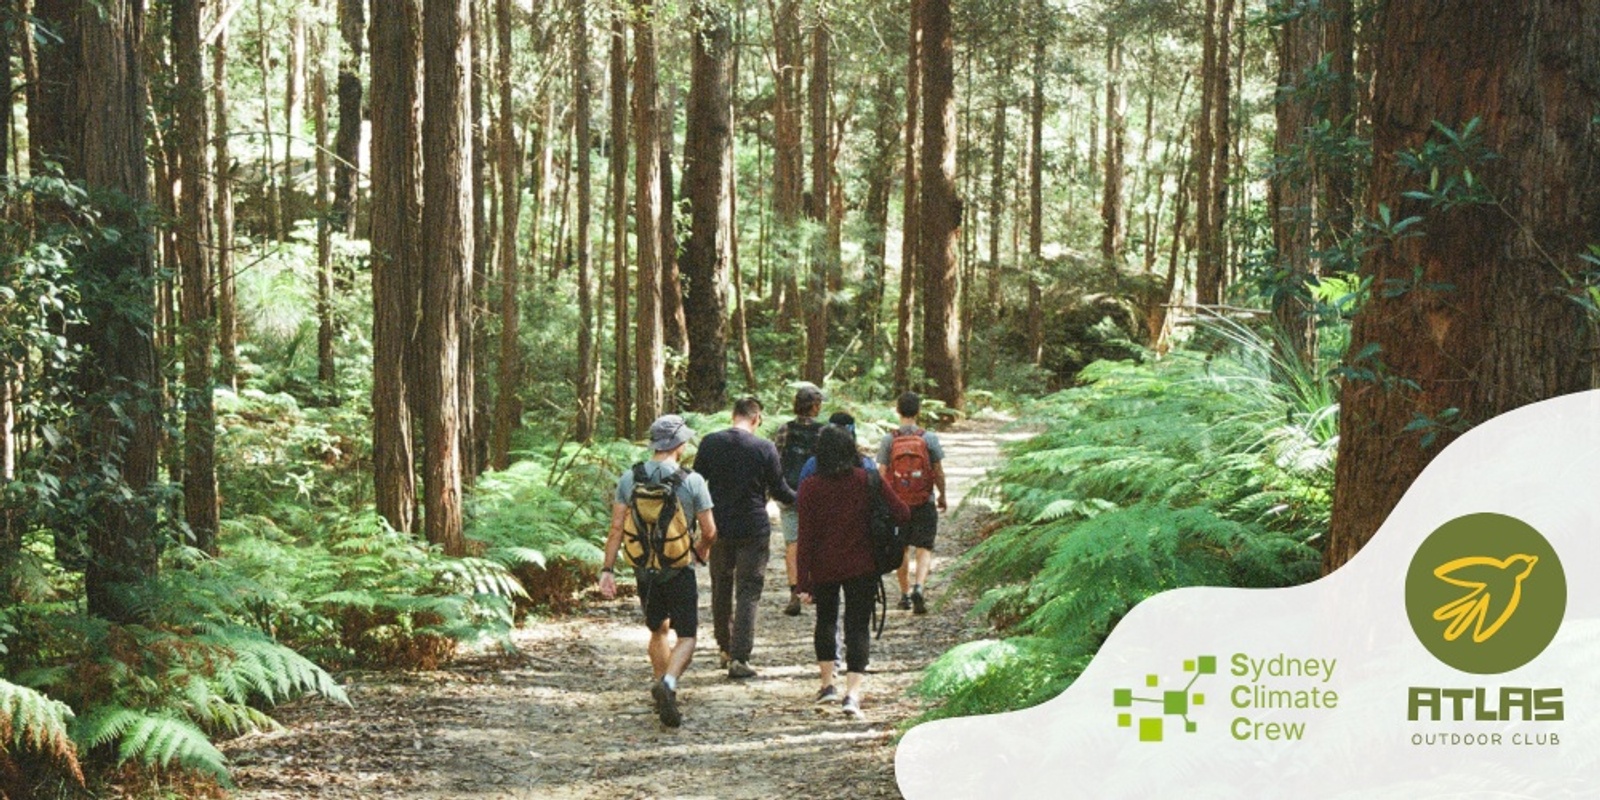 Banner image for July Hike | Sydney Climate Crew x Atlas Outdoor Club